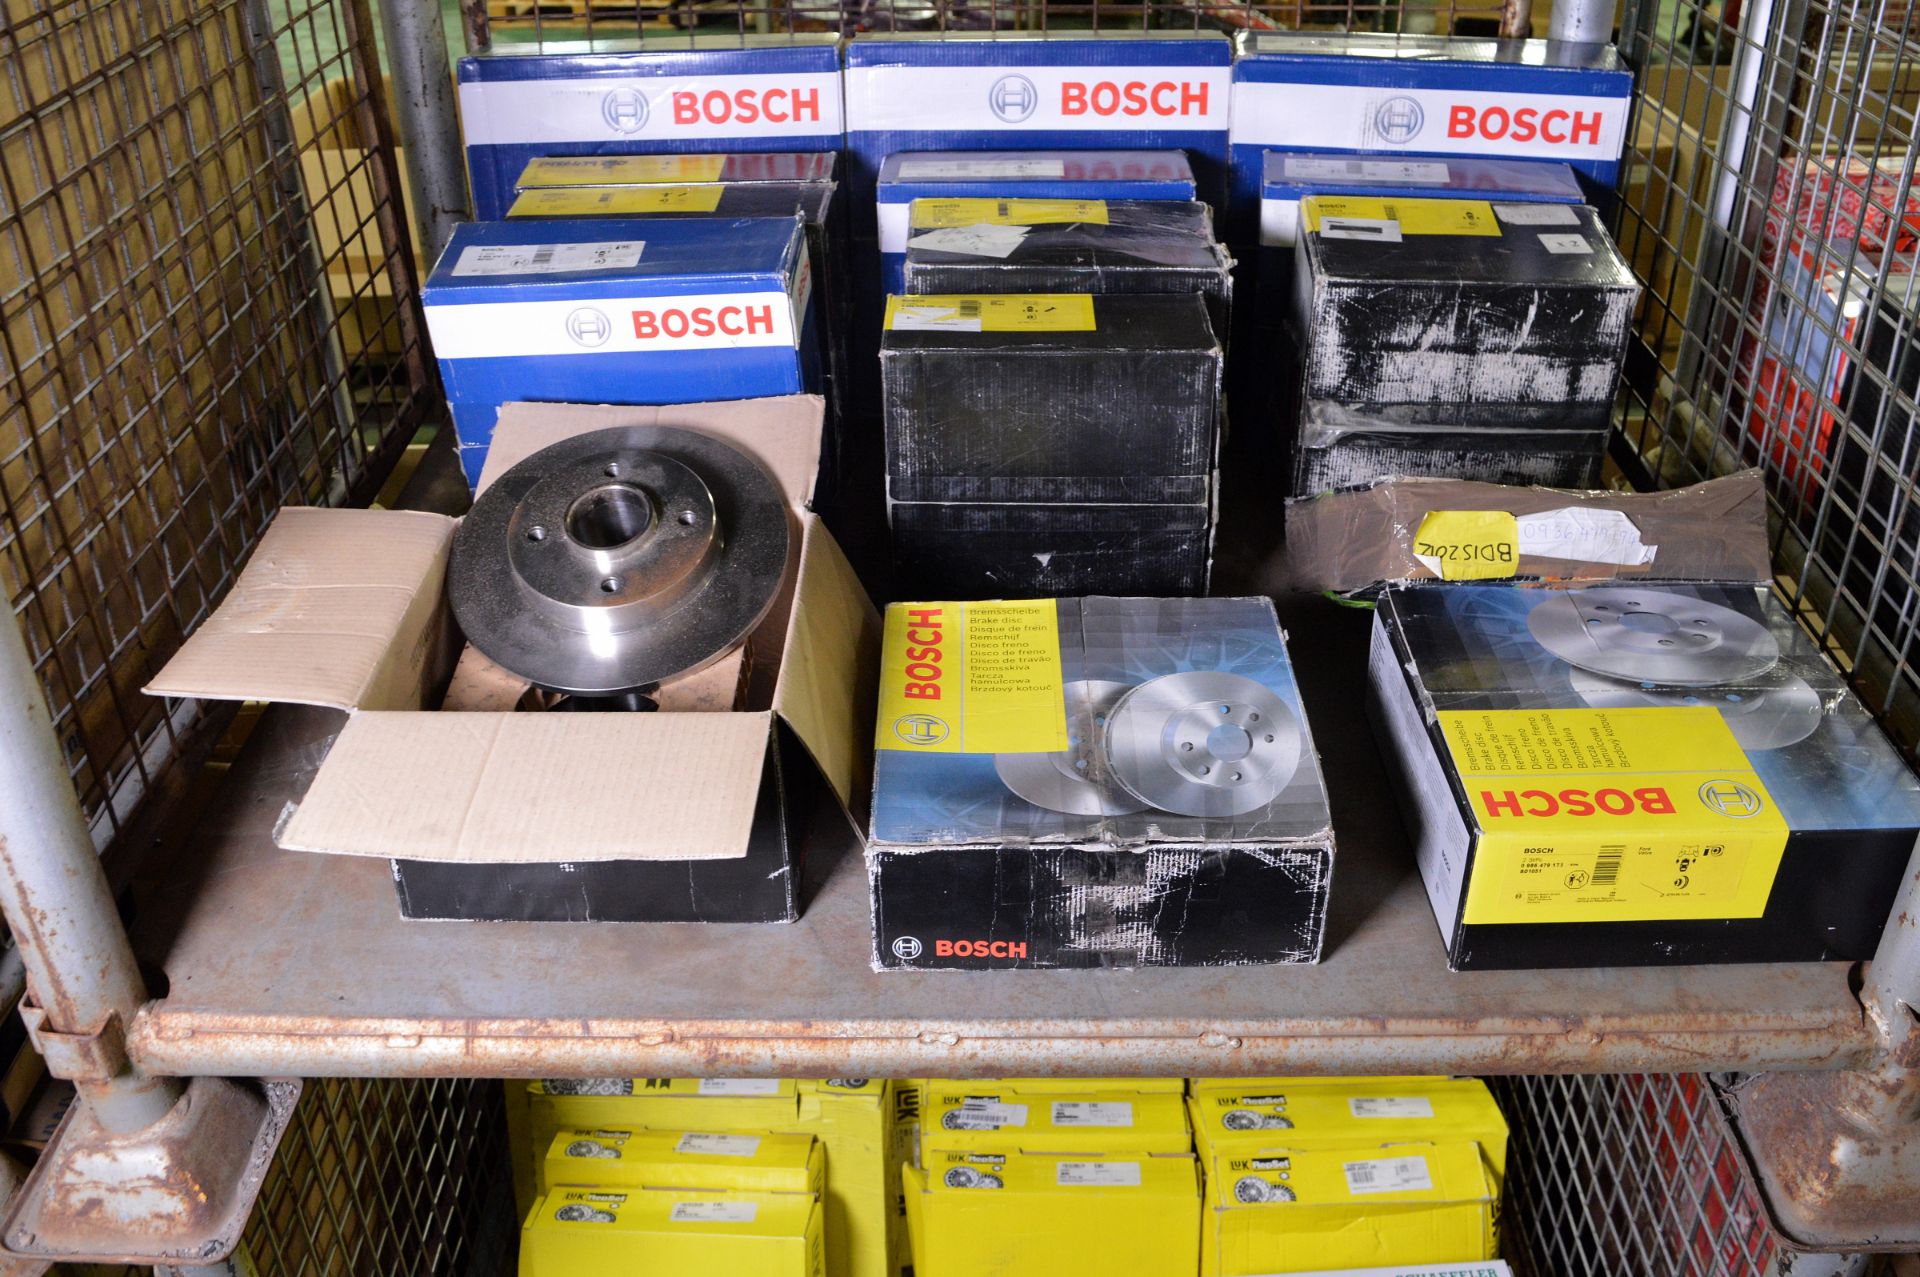 Vehicle parts - Bosch brake discs - see pictures for models and types